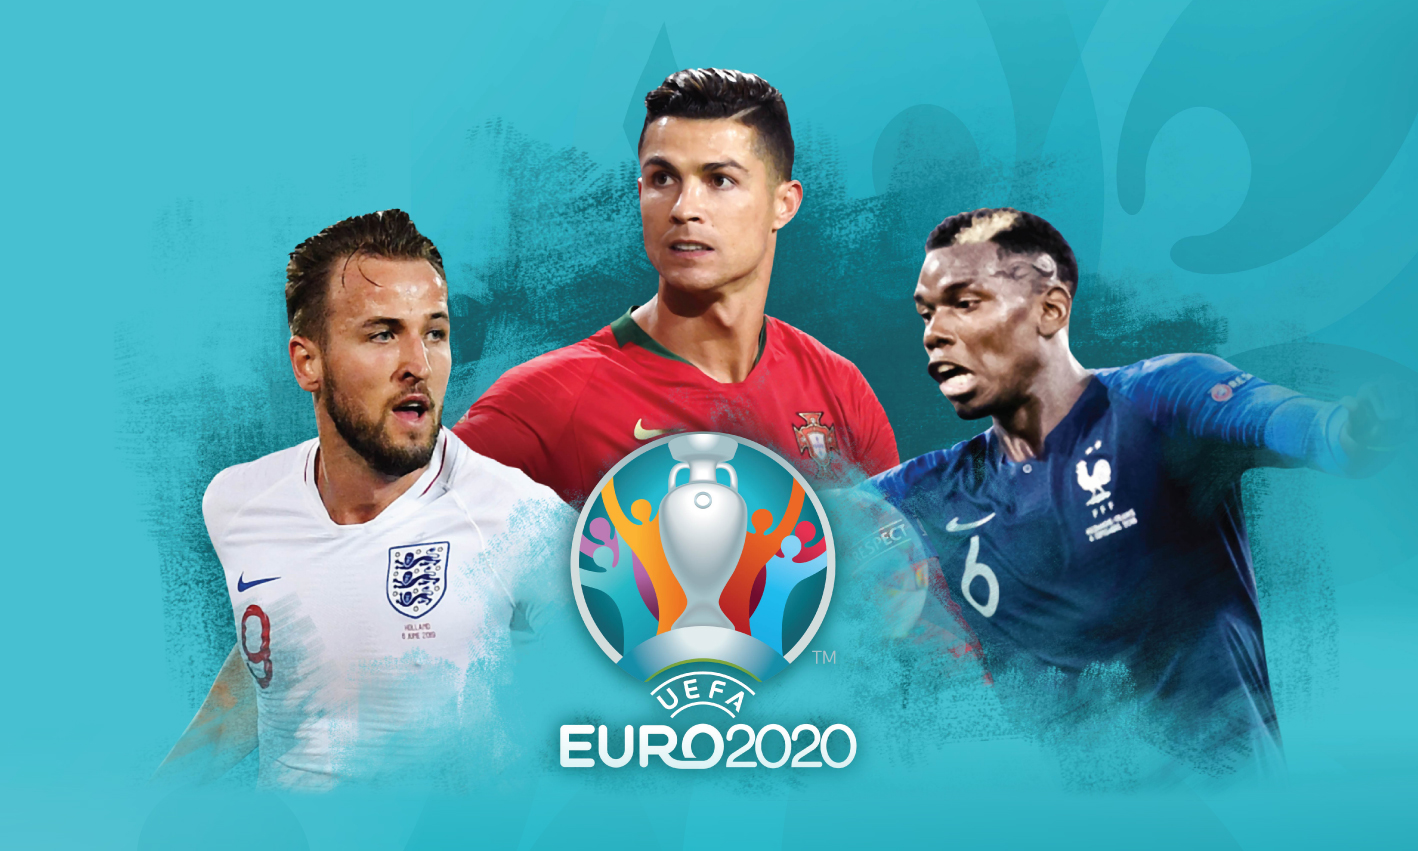 Just in time for kick off UEFA EURO 2020